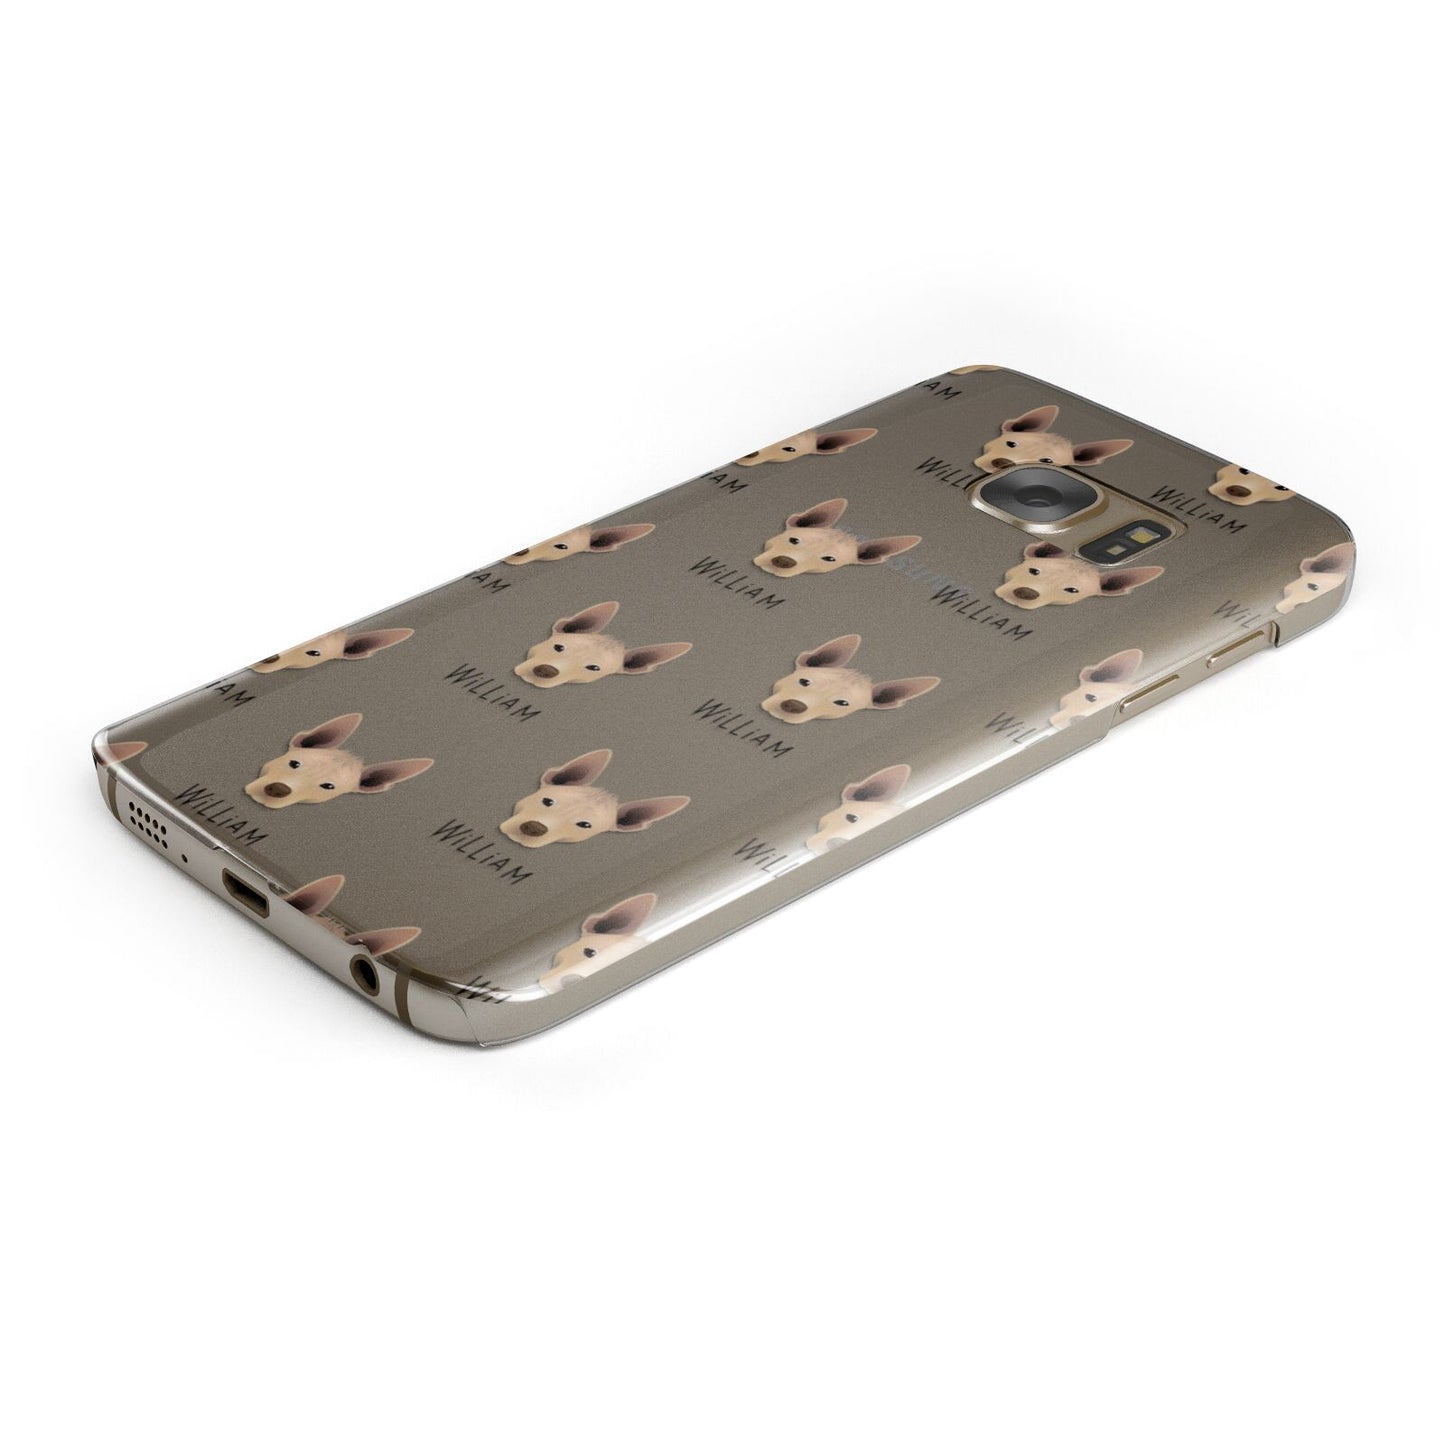 Mexican Hairless Icon with Name Samsung Galaxy Case Bottom Cutout